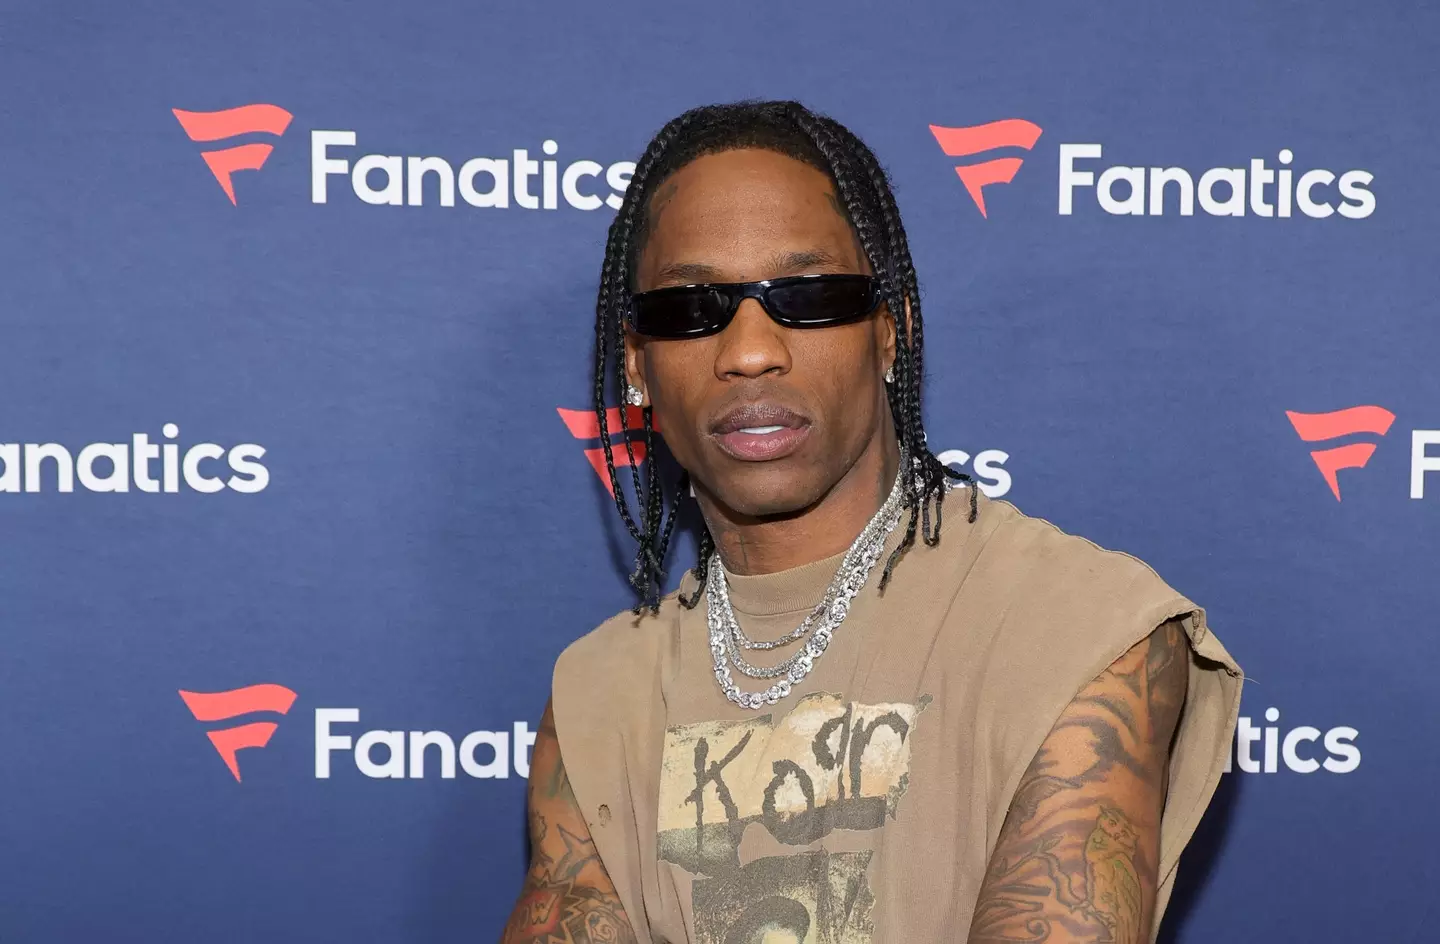 Judge Kristen Hawkin denied the motion meaning the rapper will have to face a trial next month. (Ethan Miller/Getty Images)